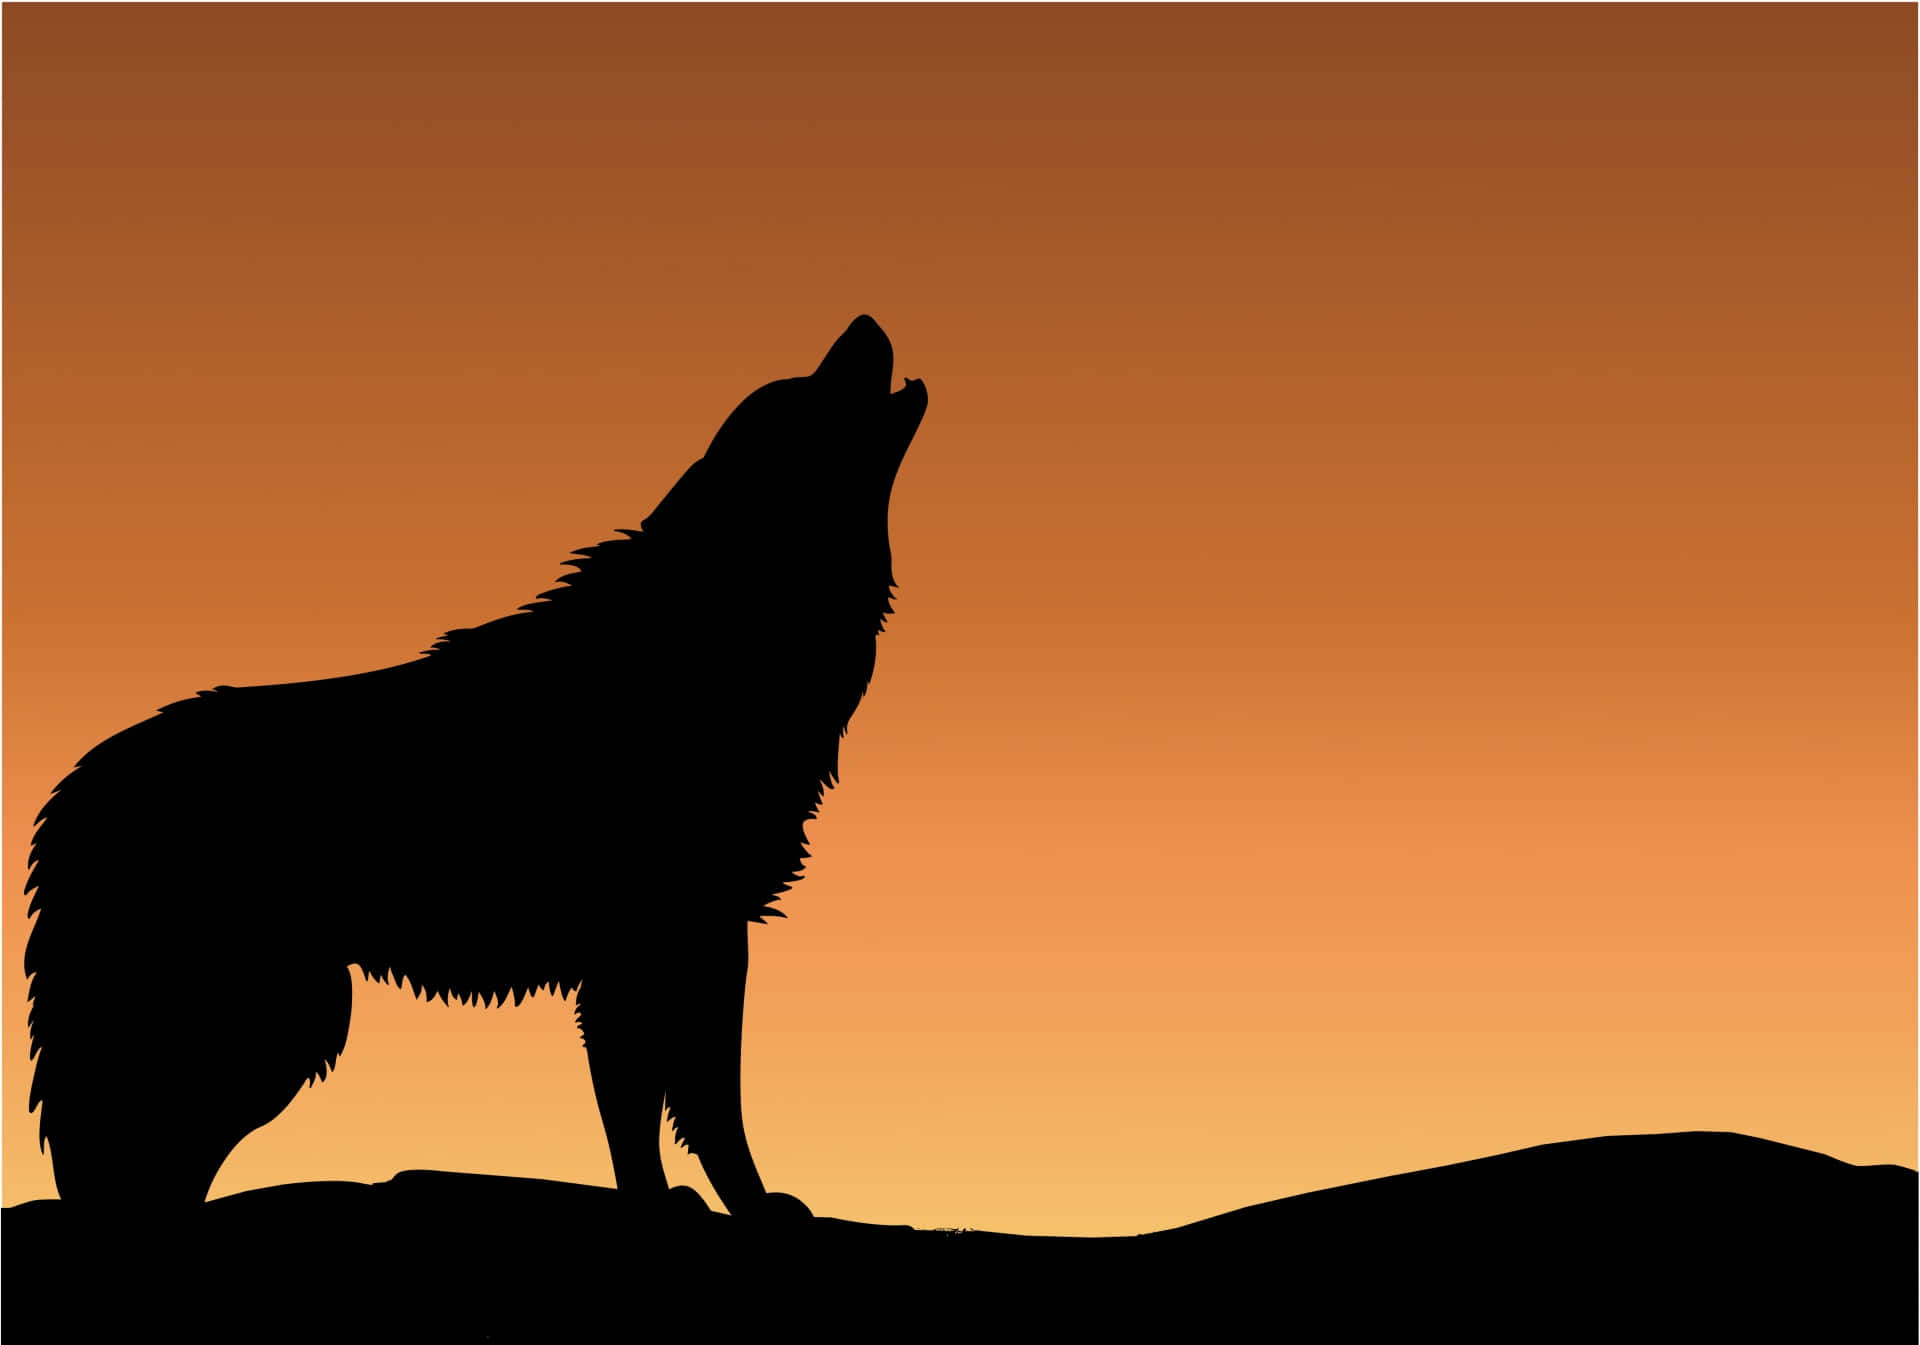 A lone howling wolf in an autumn forest.